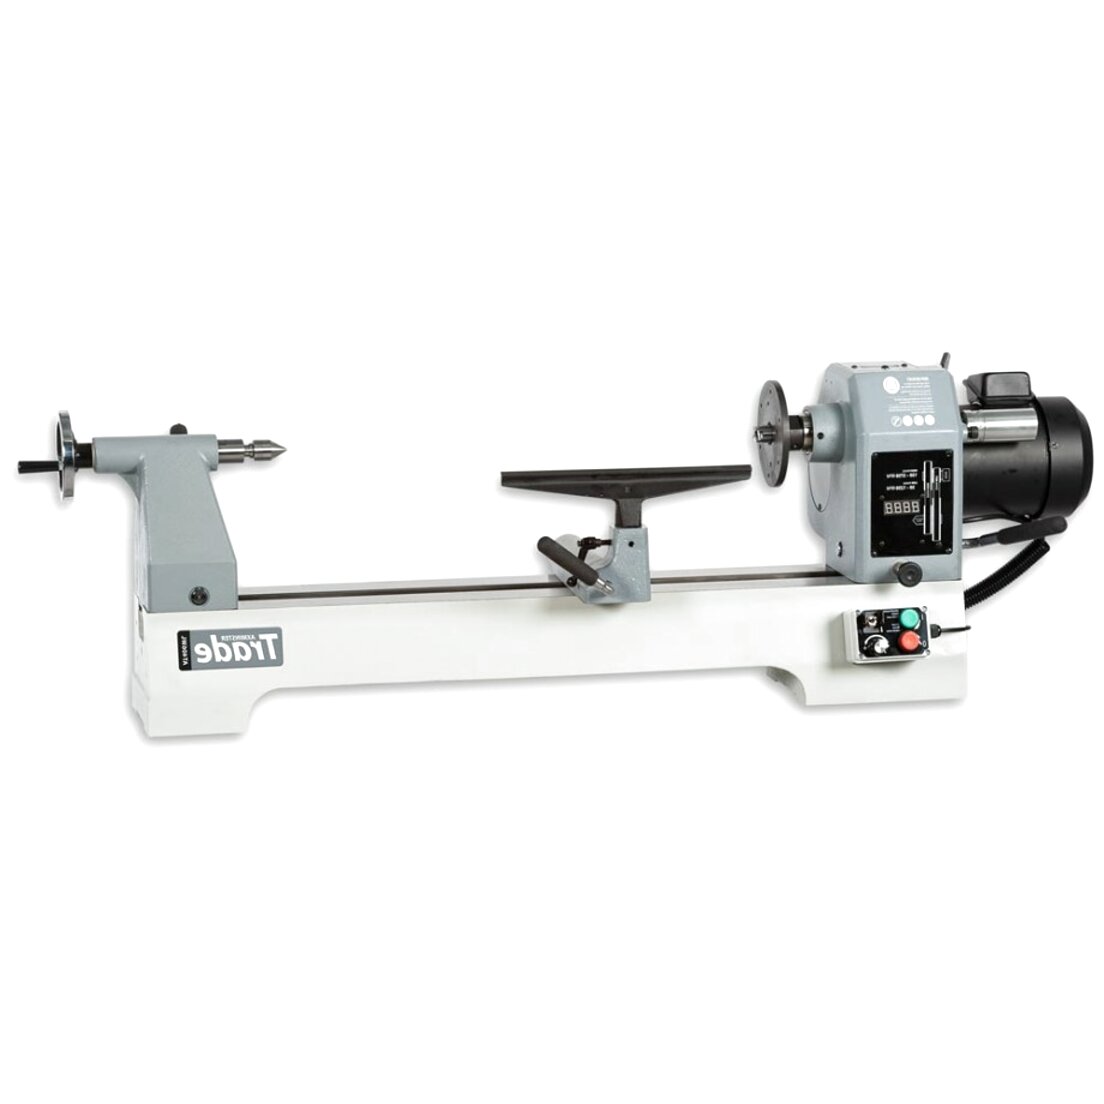 Woodturning Lathes for sale in UK View 78 bargains